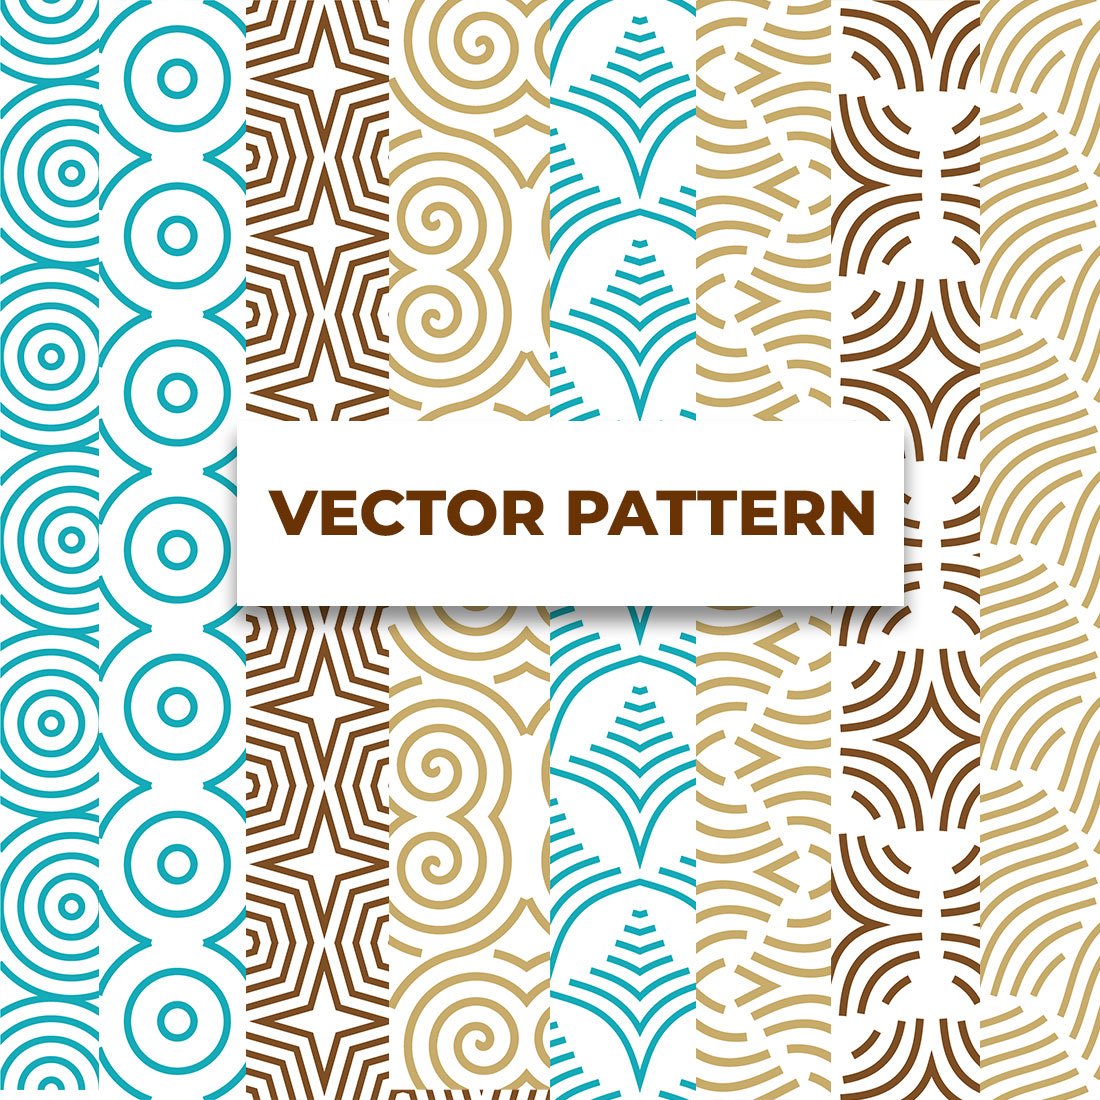 Vector pattern cover image.